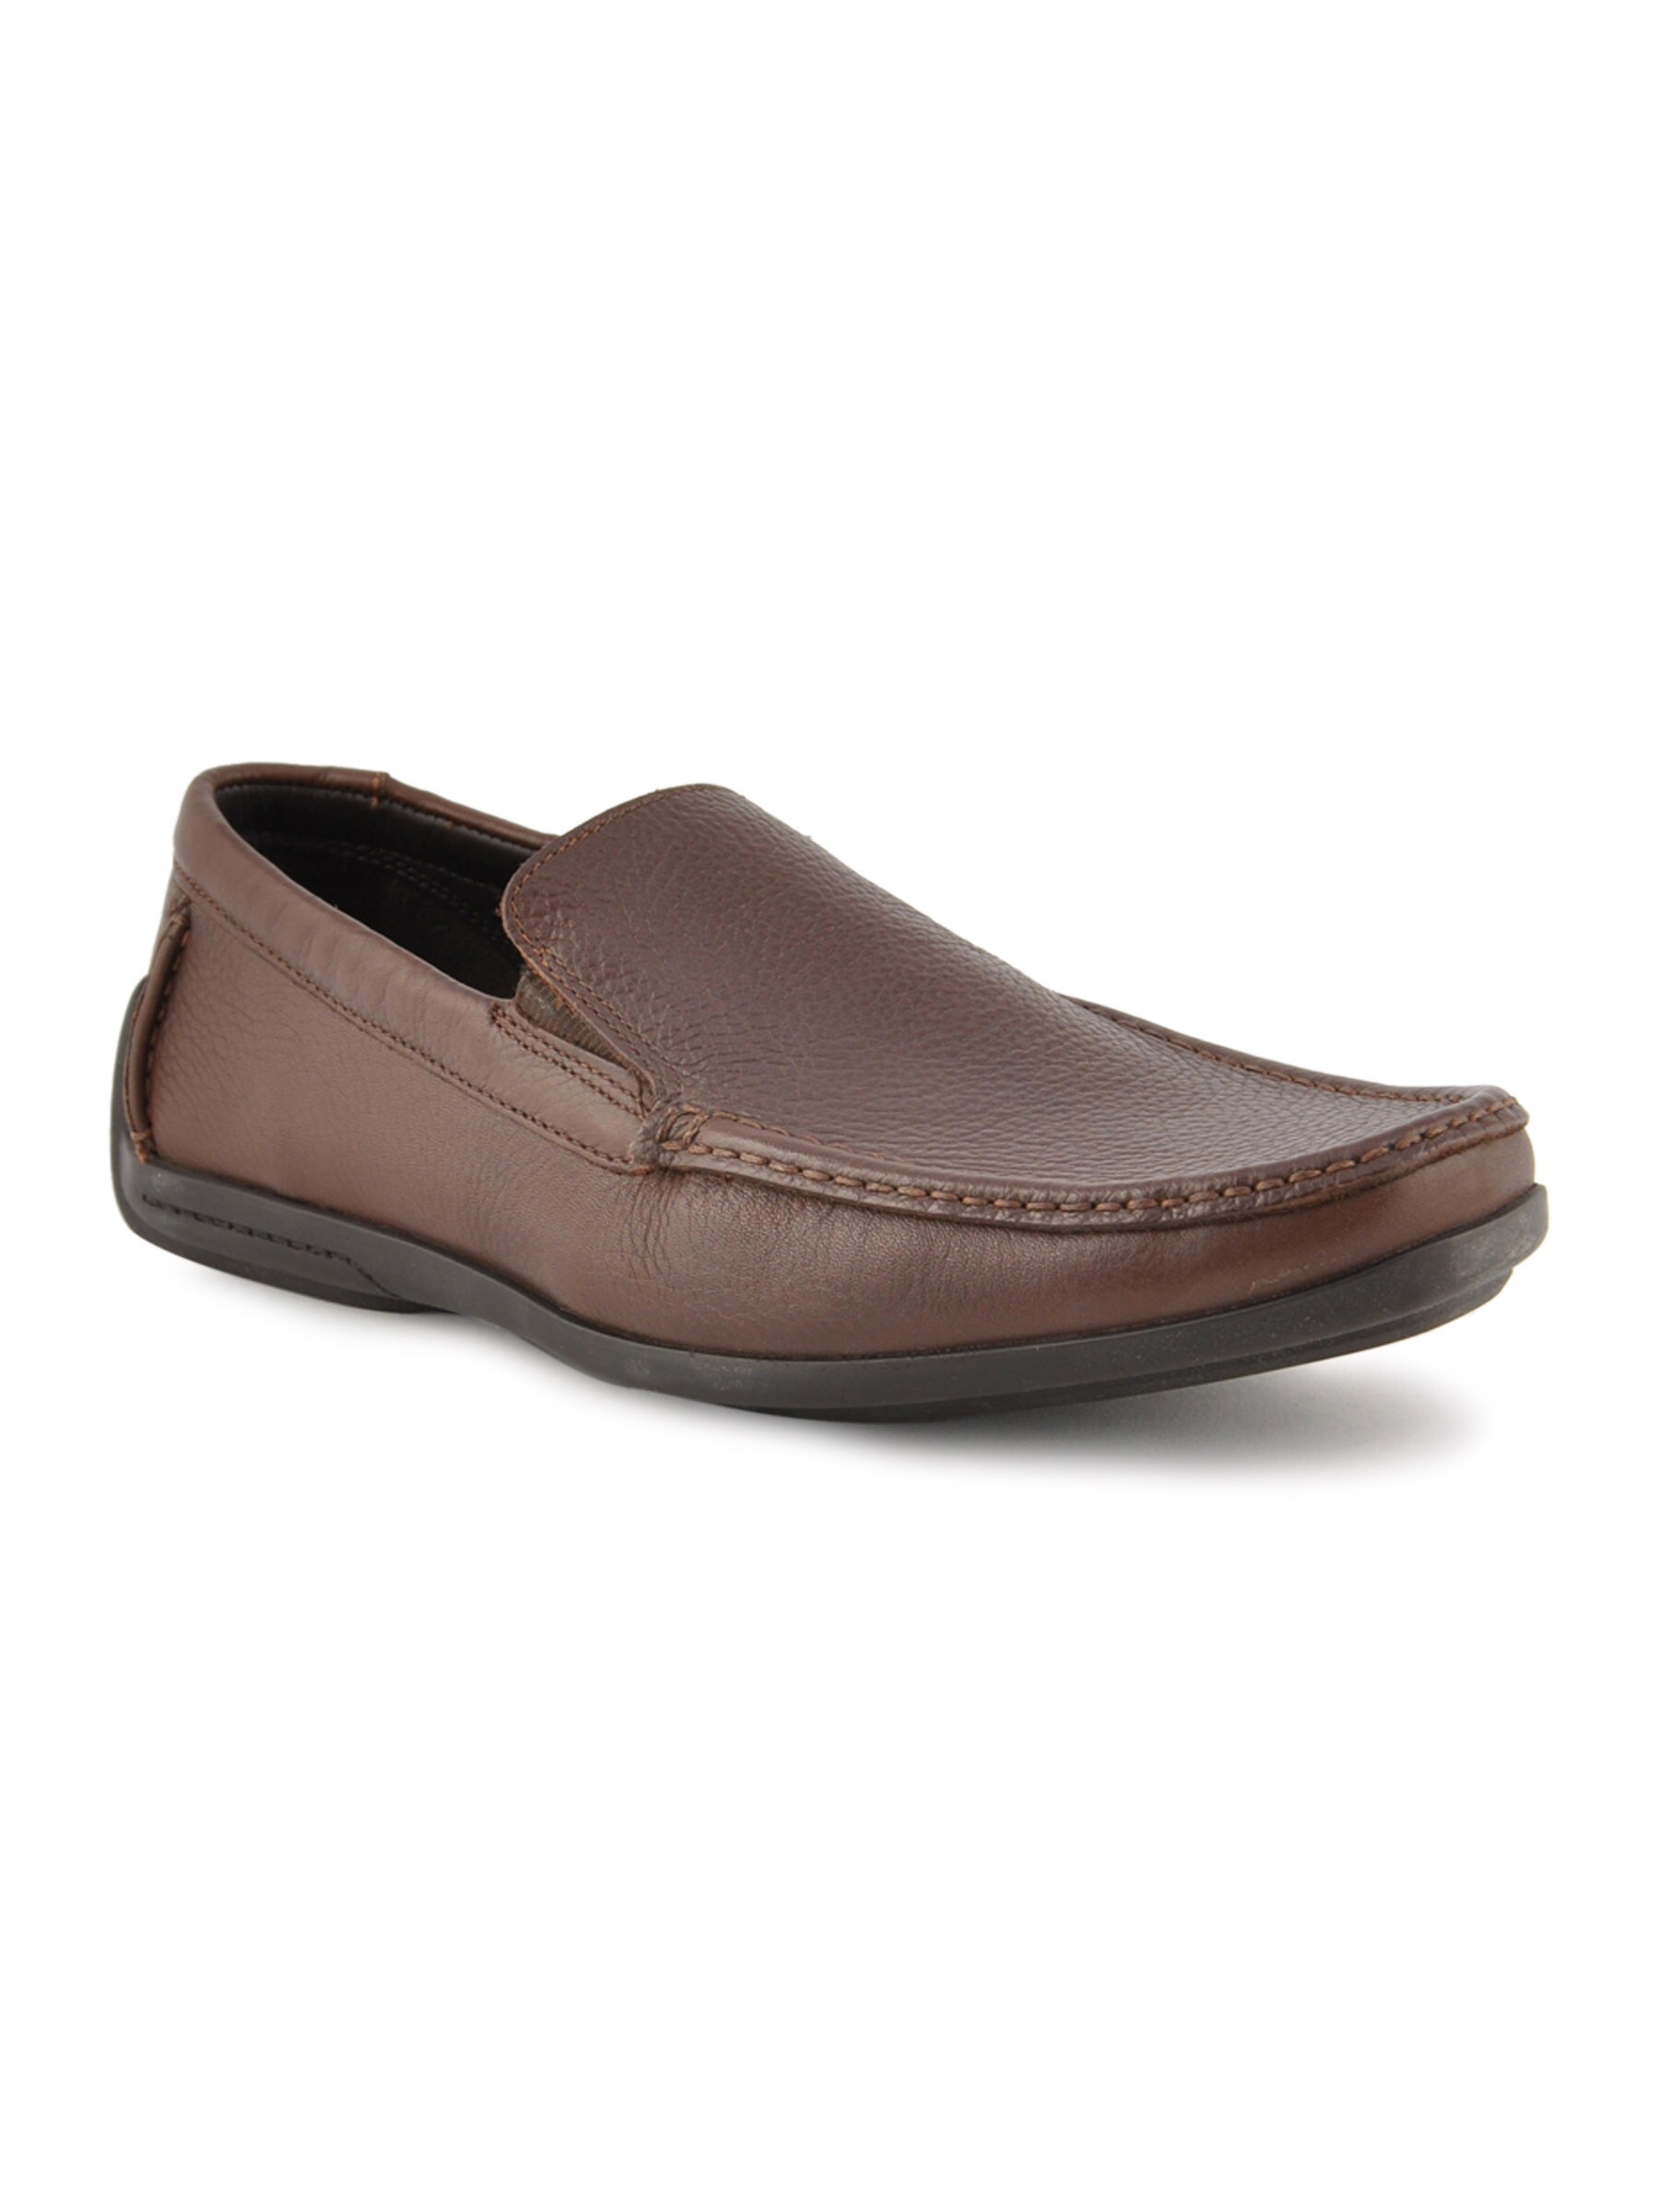 Clarks Brown Leather Casual Shoes